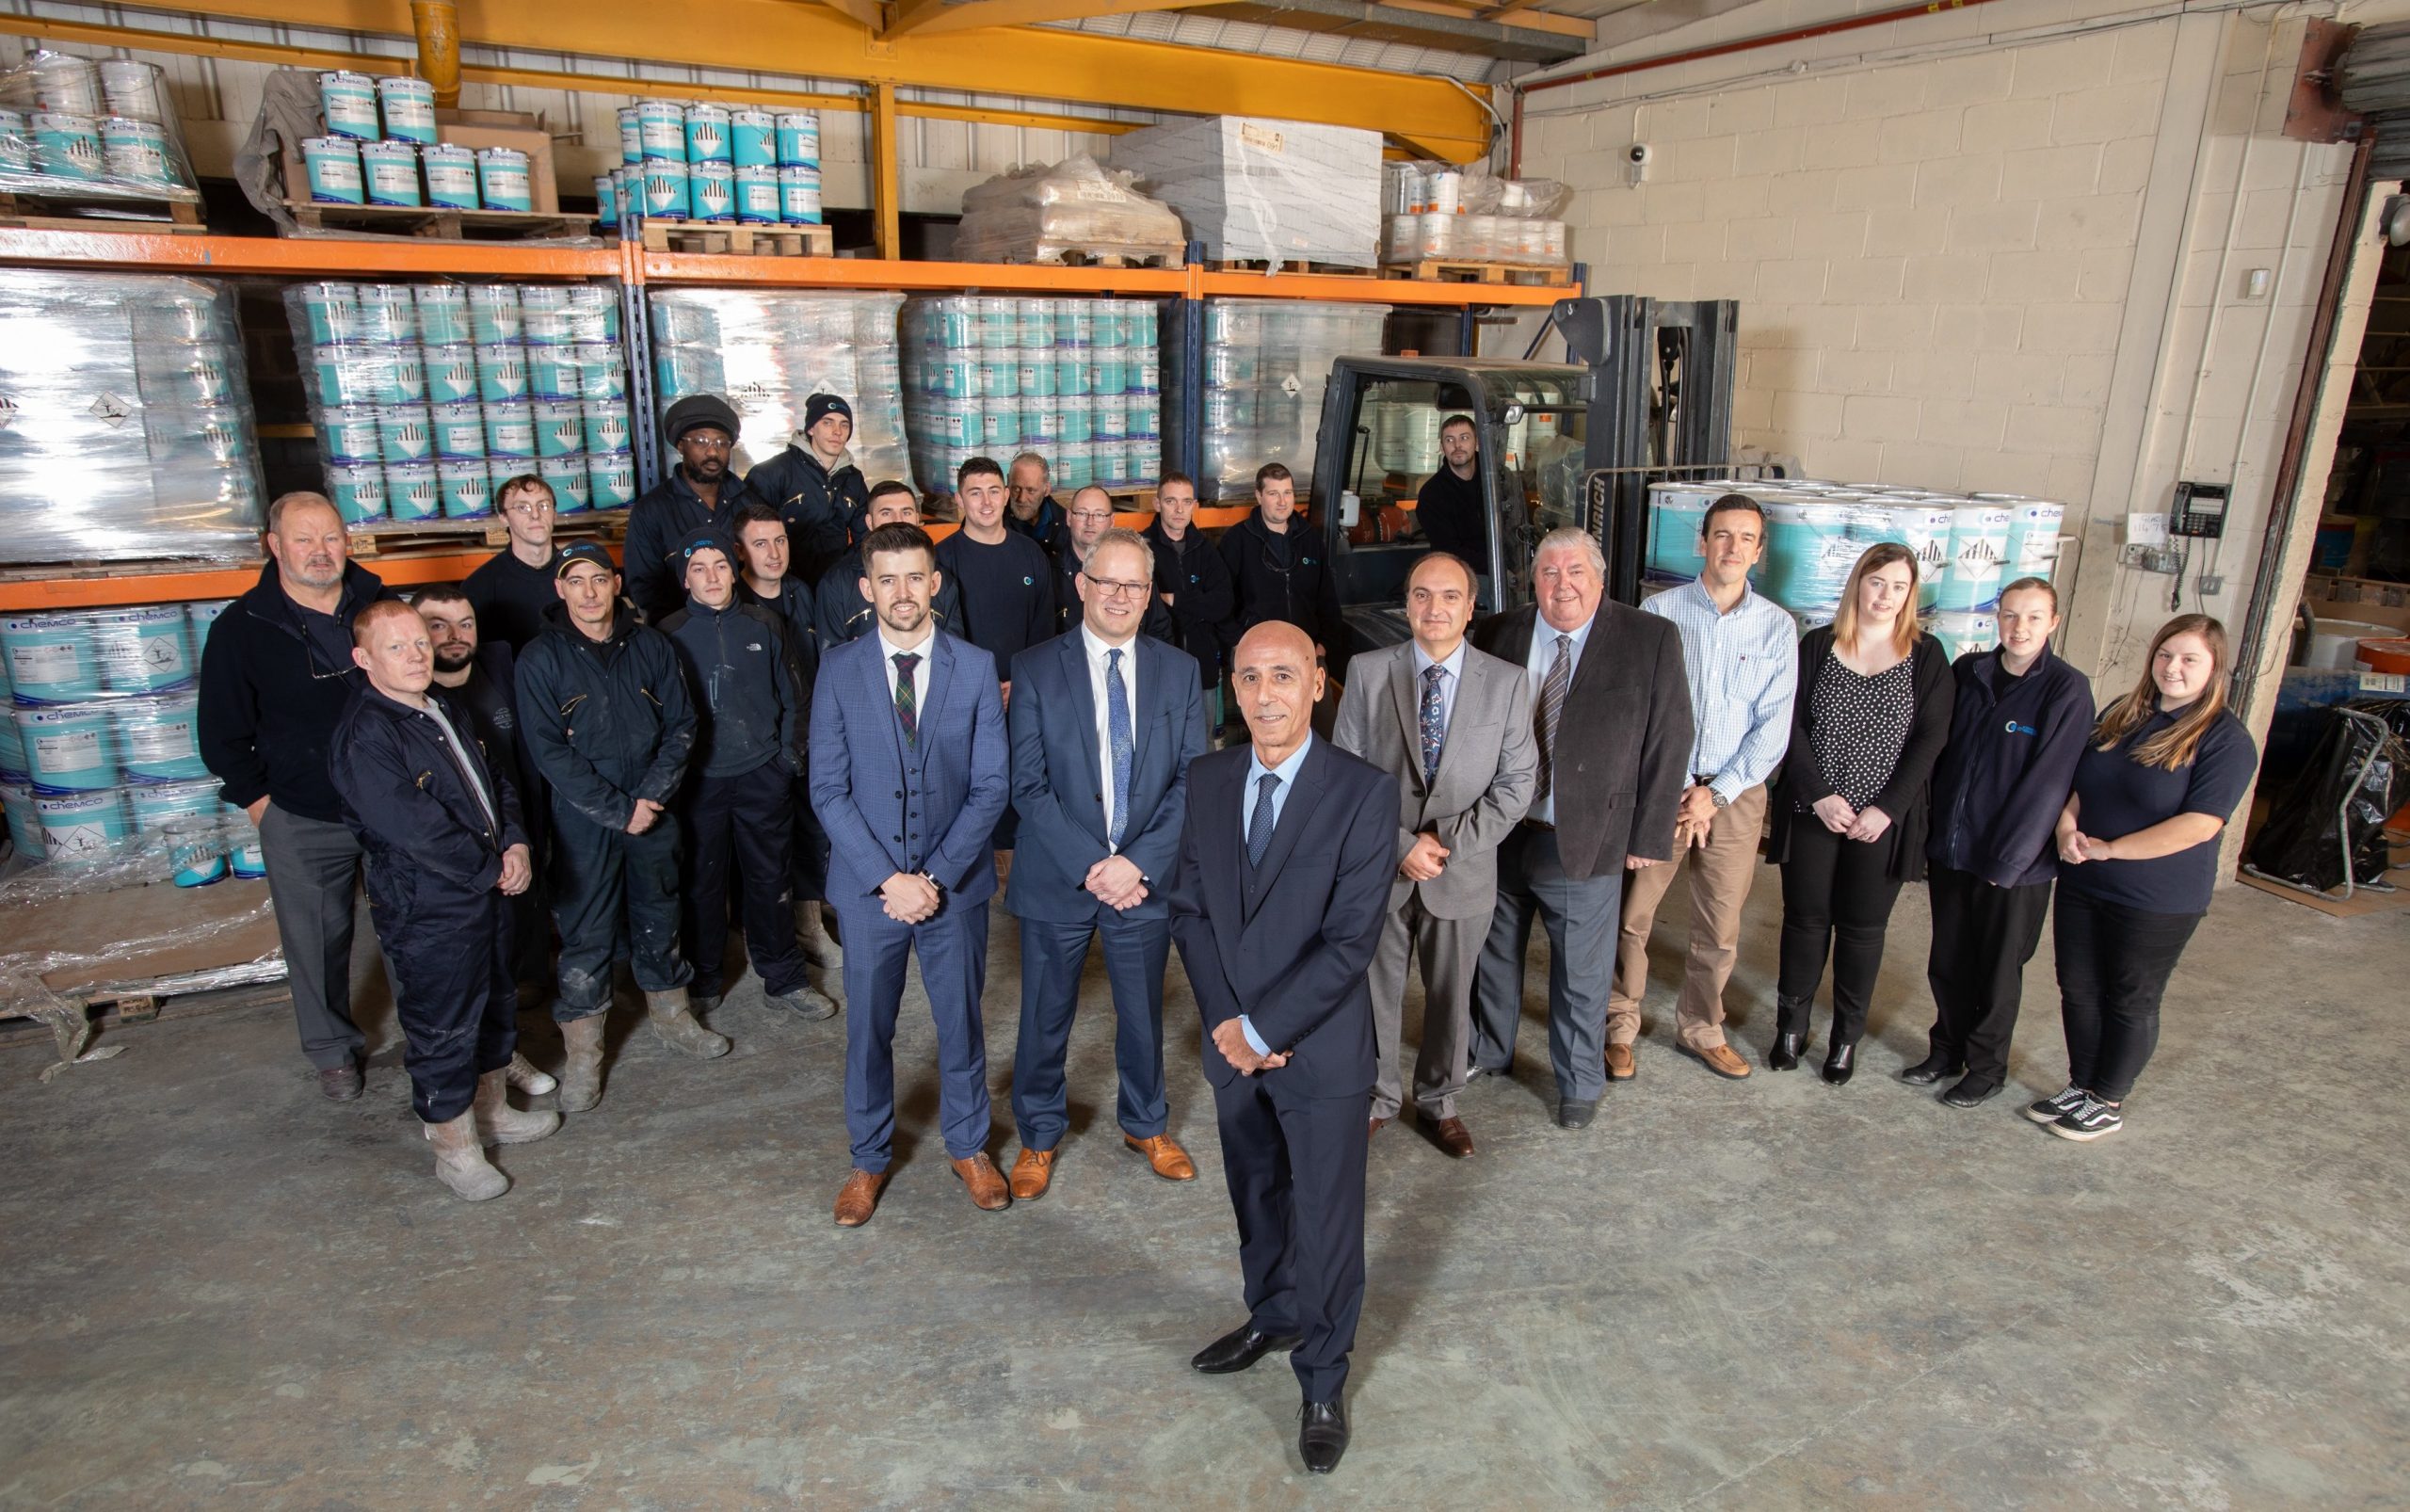 Chemco International, Coatbridge Image shows MD, Mansoor Khorasani (centre front) with colleagues at their Scottish manufacturing plant. 